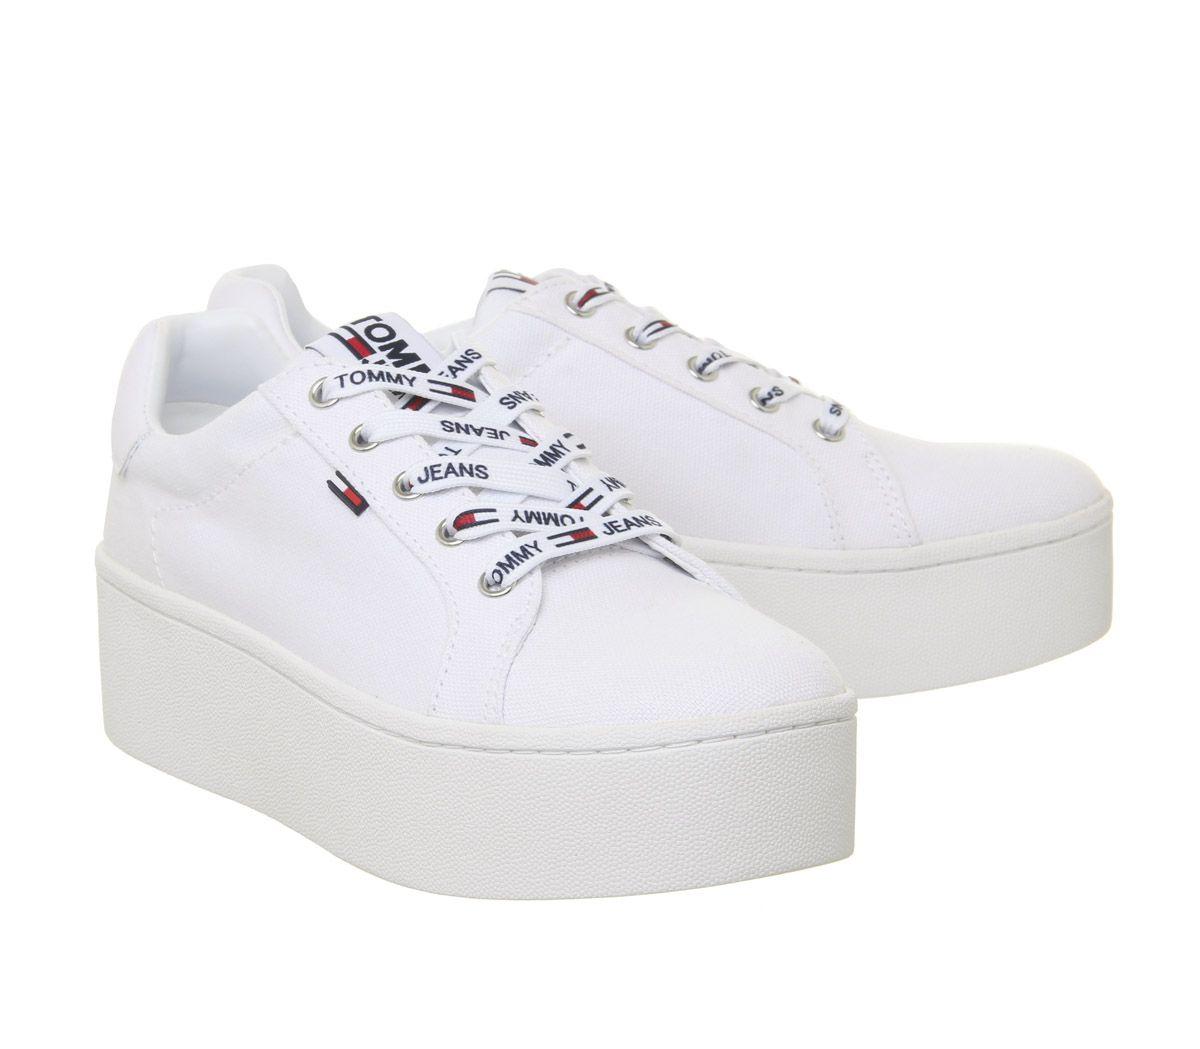 Tommy Hilfiger Roxy Trainers Hotsell, SAVE 52%.